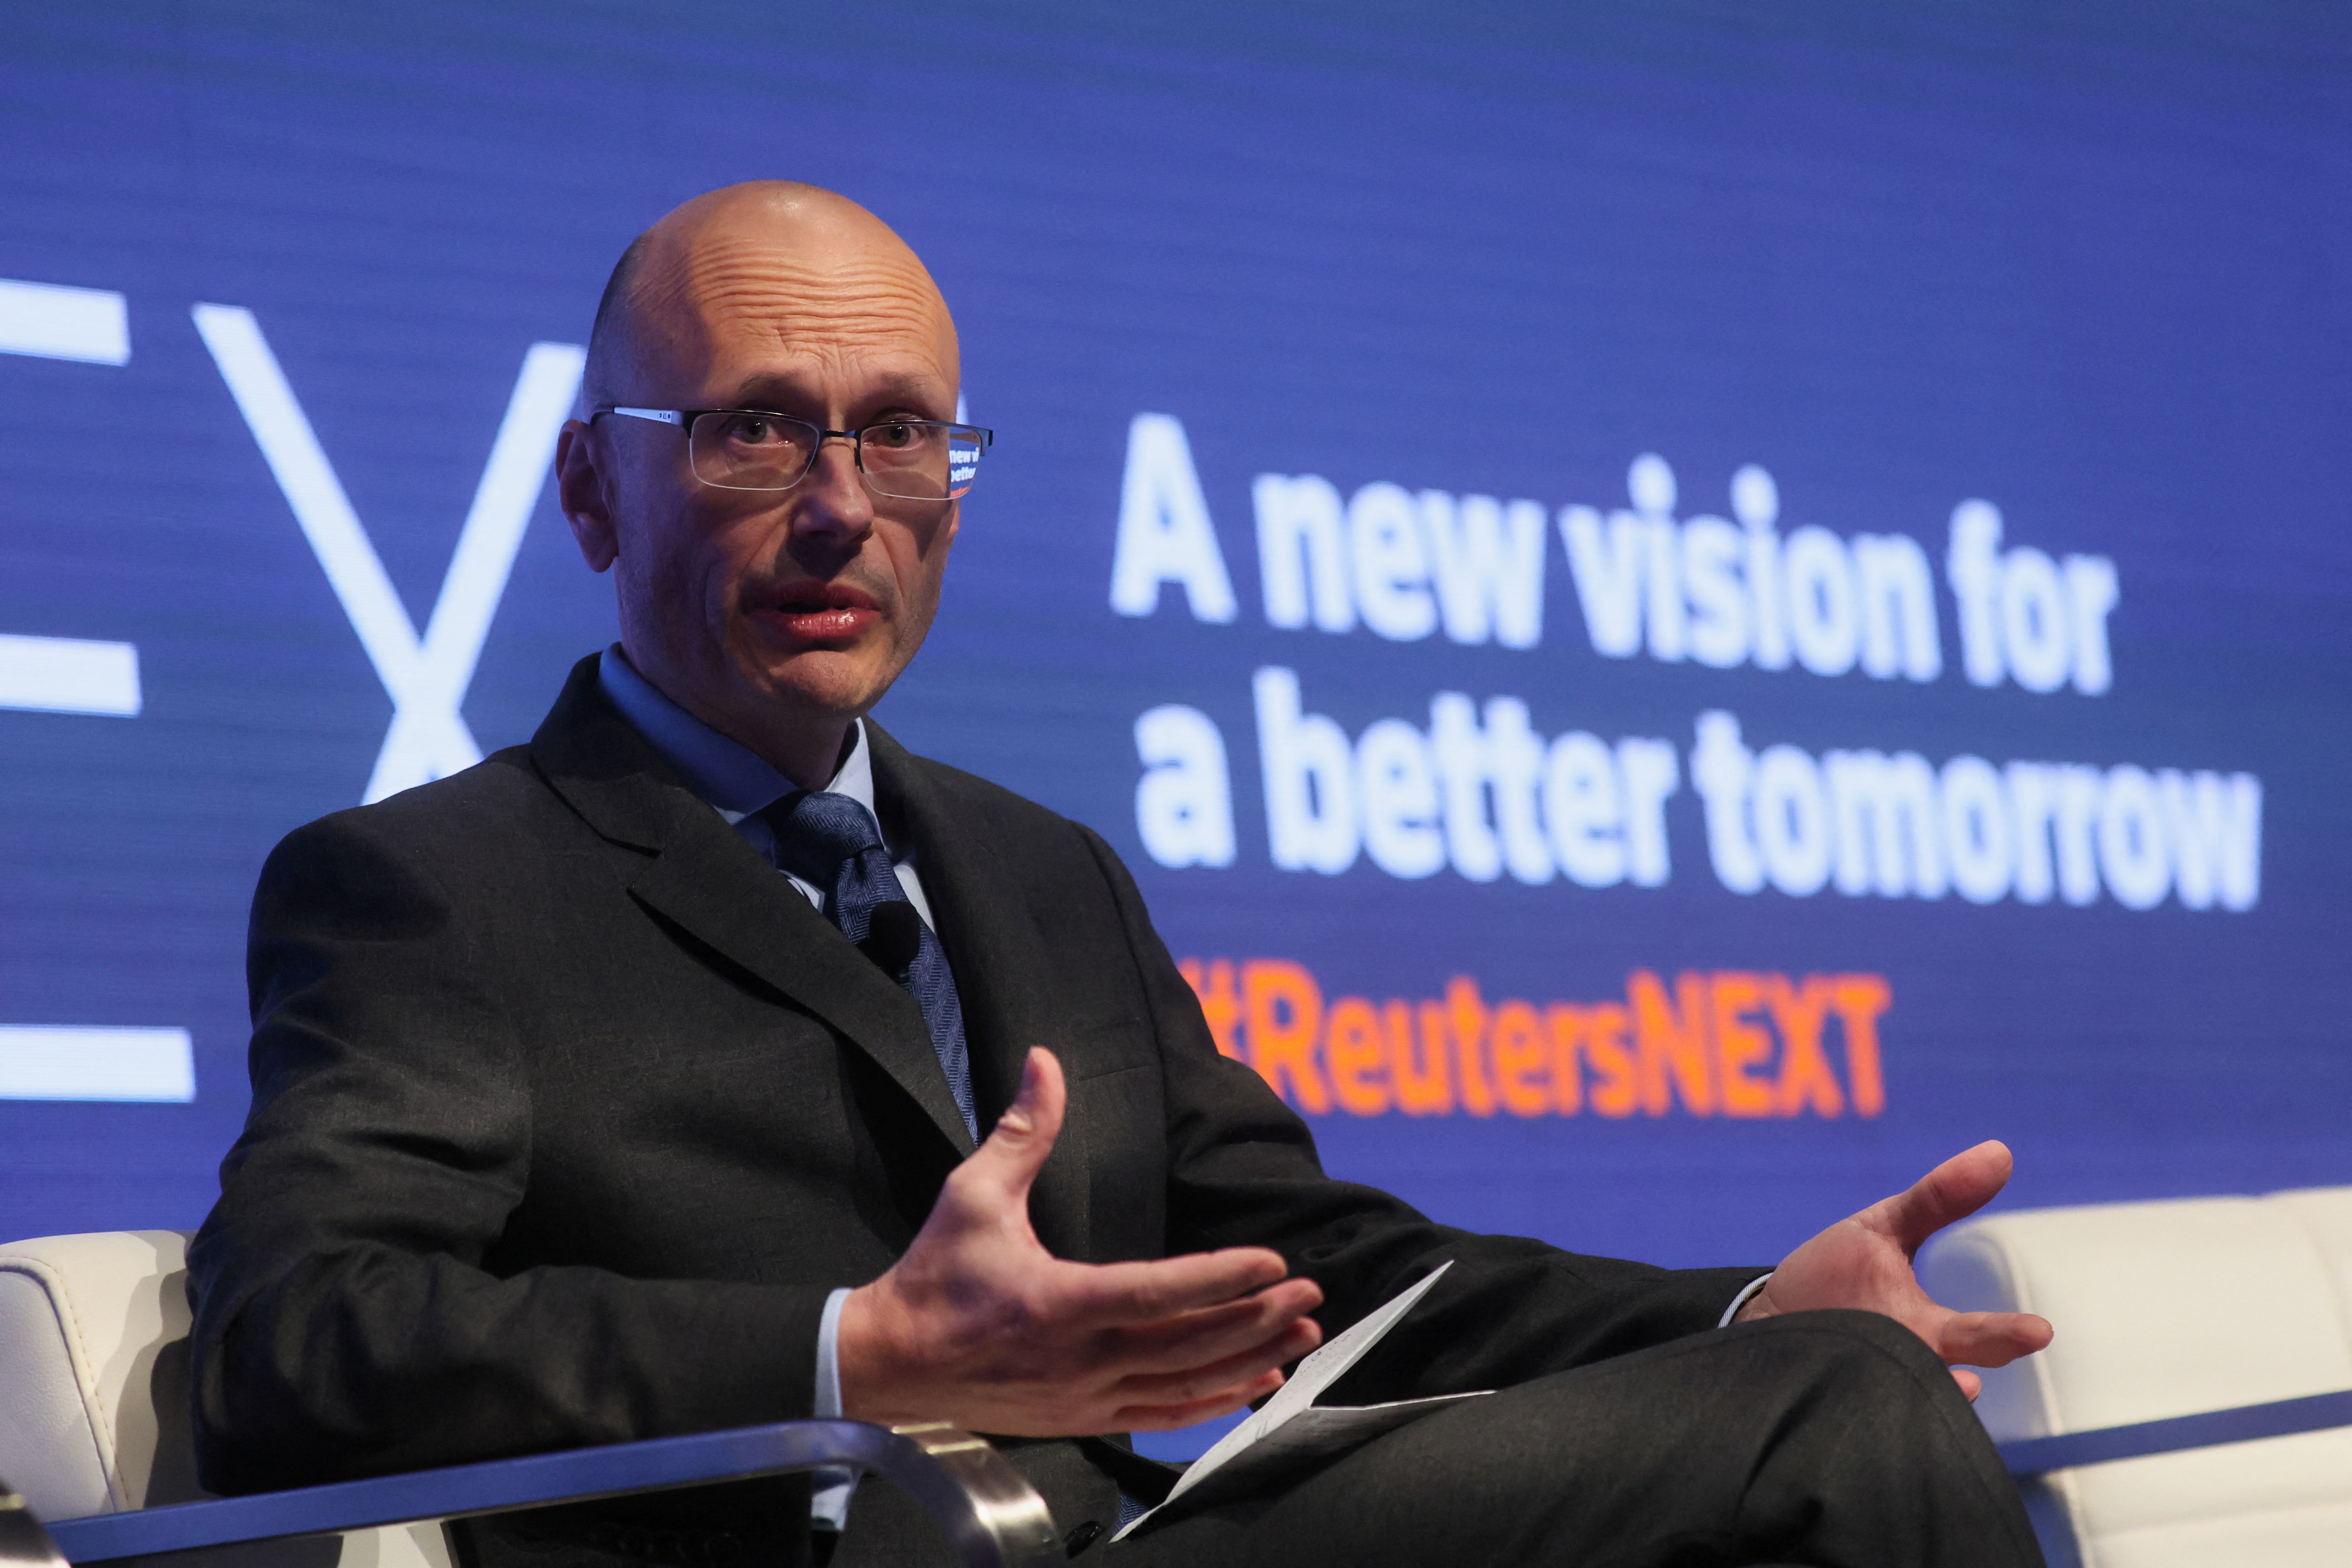 Reuters NEXT Newsmaker event in New York City